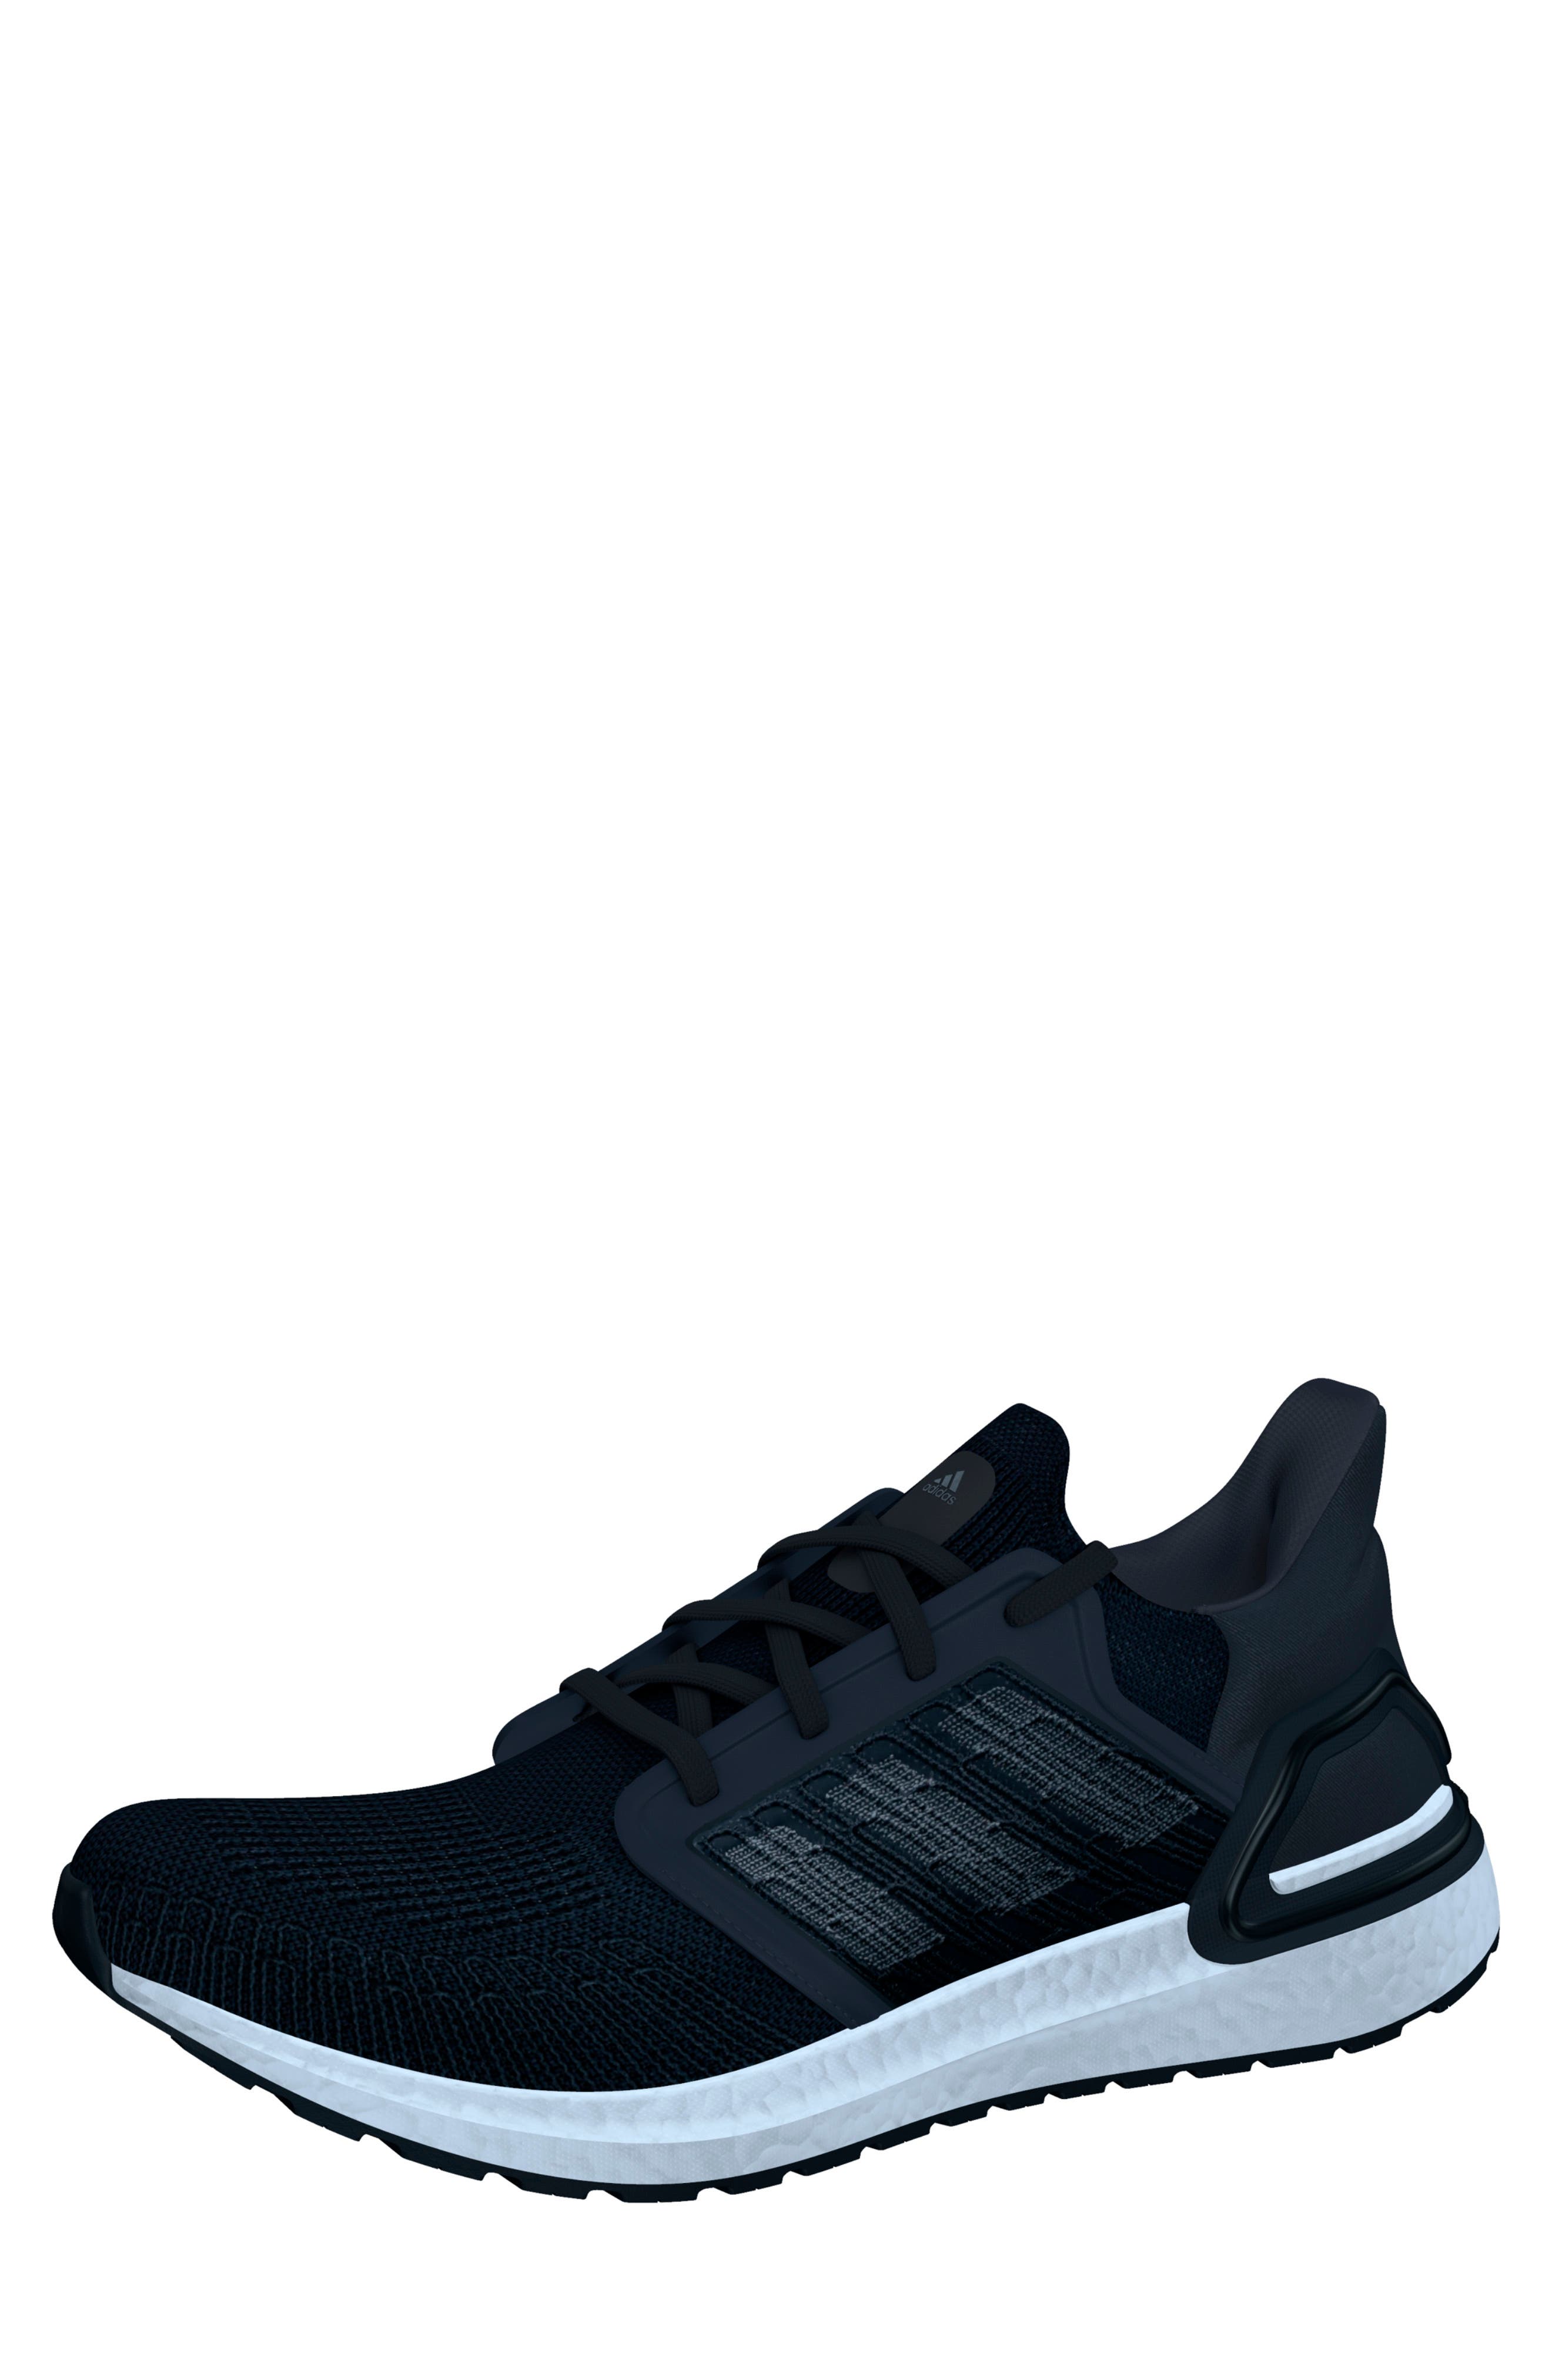 adidas mens shoes nordstrom